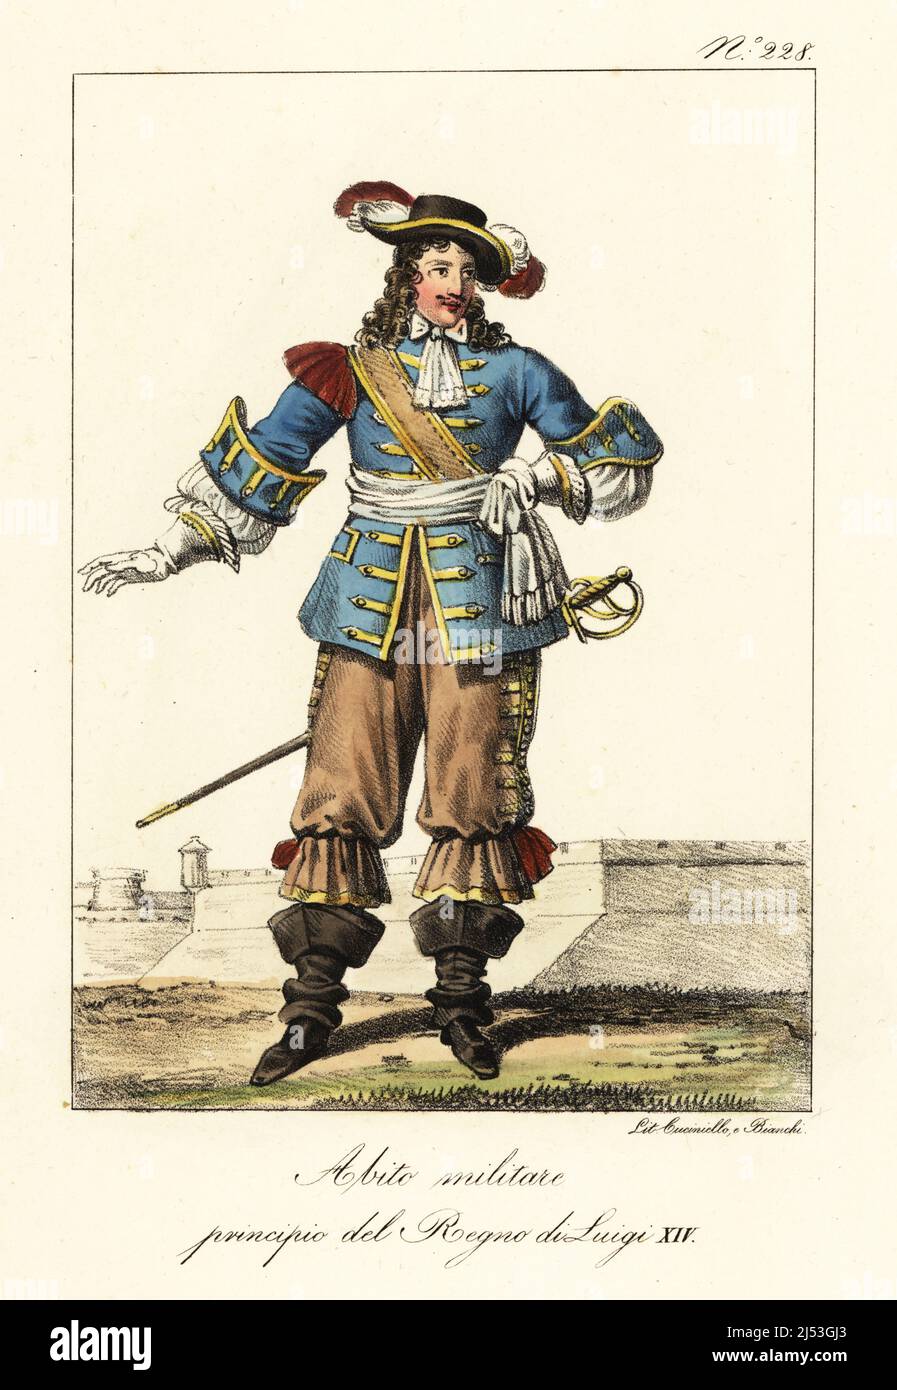 French military uniform of the start of the reign of King Louis XIV.  Plumed hat, blue coat with one epaulette, gold frogging, pantalons, cavalier boots, sword. Costume Militaire commencement du Regne de Louis XIV.. Handcoloured lithograph by Lorenzo Bianchi and Domenico Cuciniello after Hippolyte Lecomte from Costumi civili e militari della monarchia francese dal 1200 al 1820, Naples, 1825. Italian edition of Lecomte’s Civilian and military costumes of the French monarchy from 1200 to 1820. Stock Photo